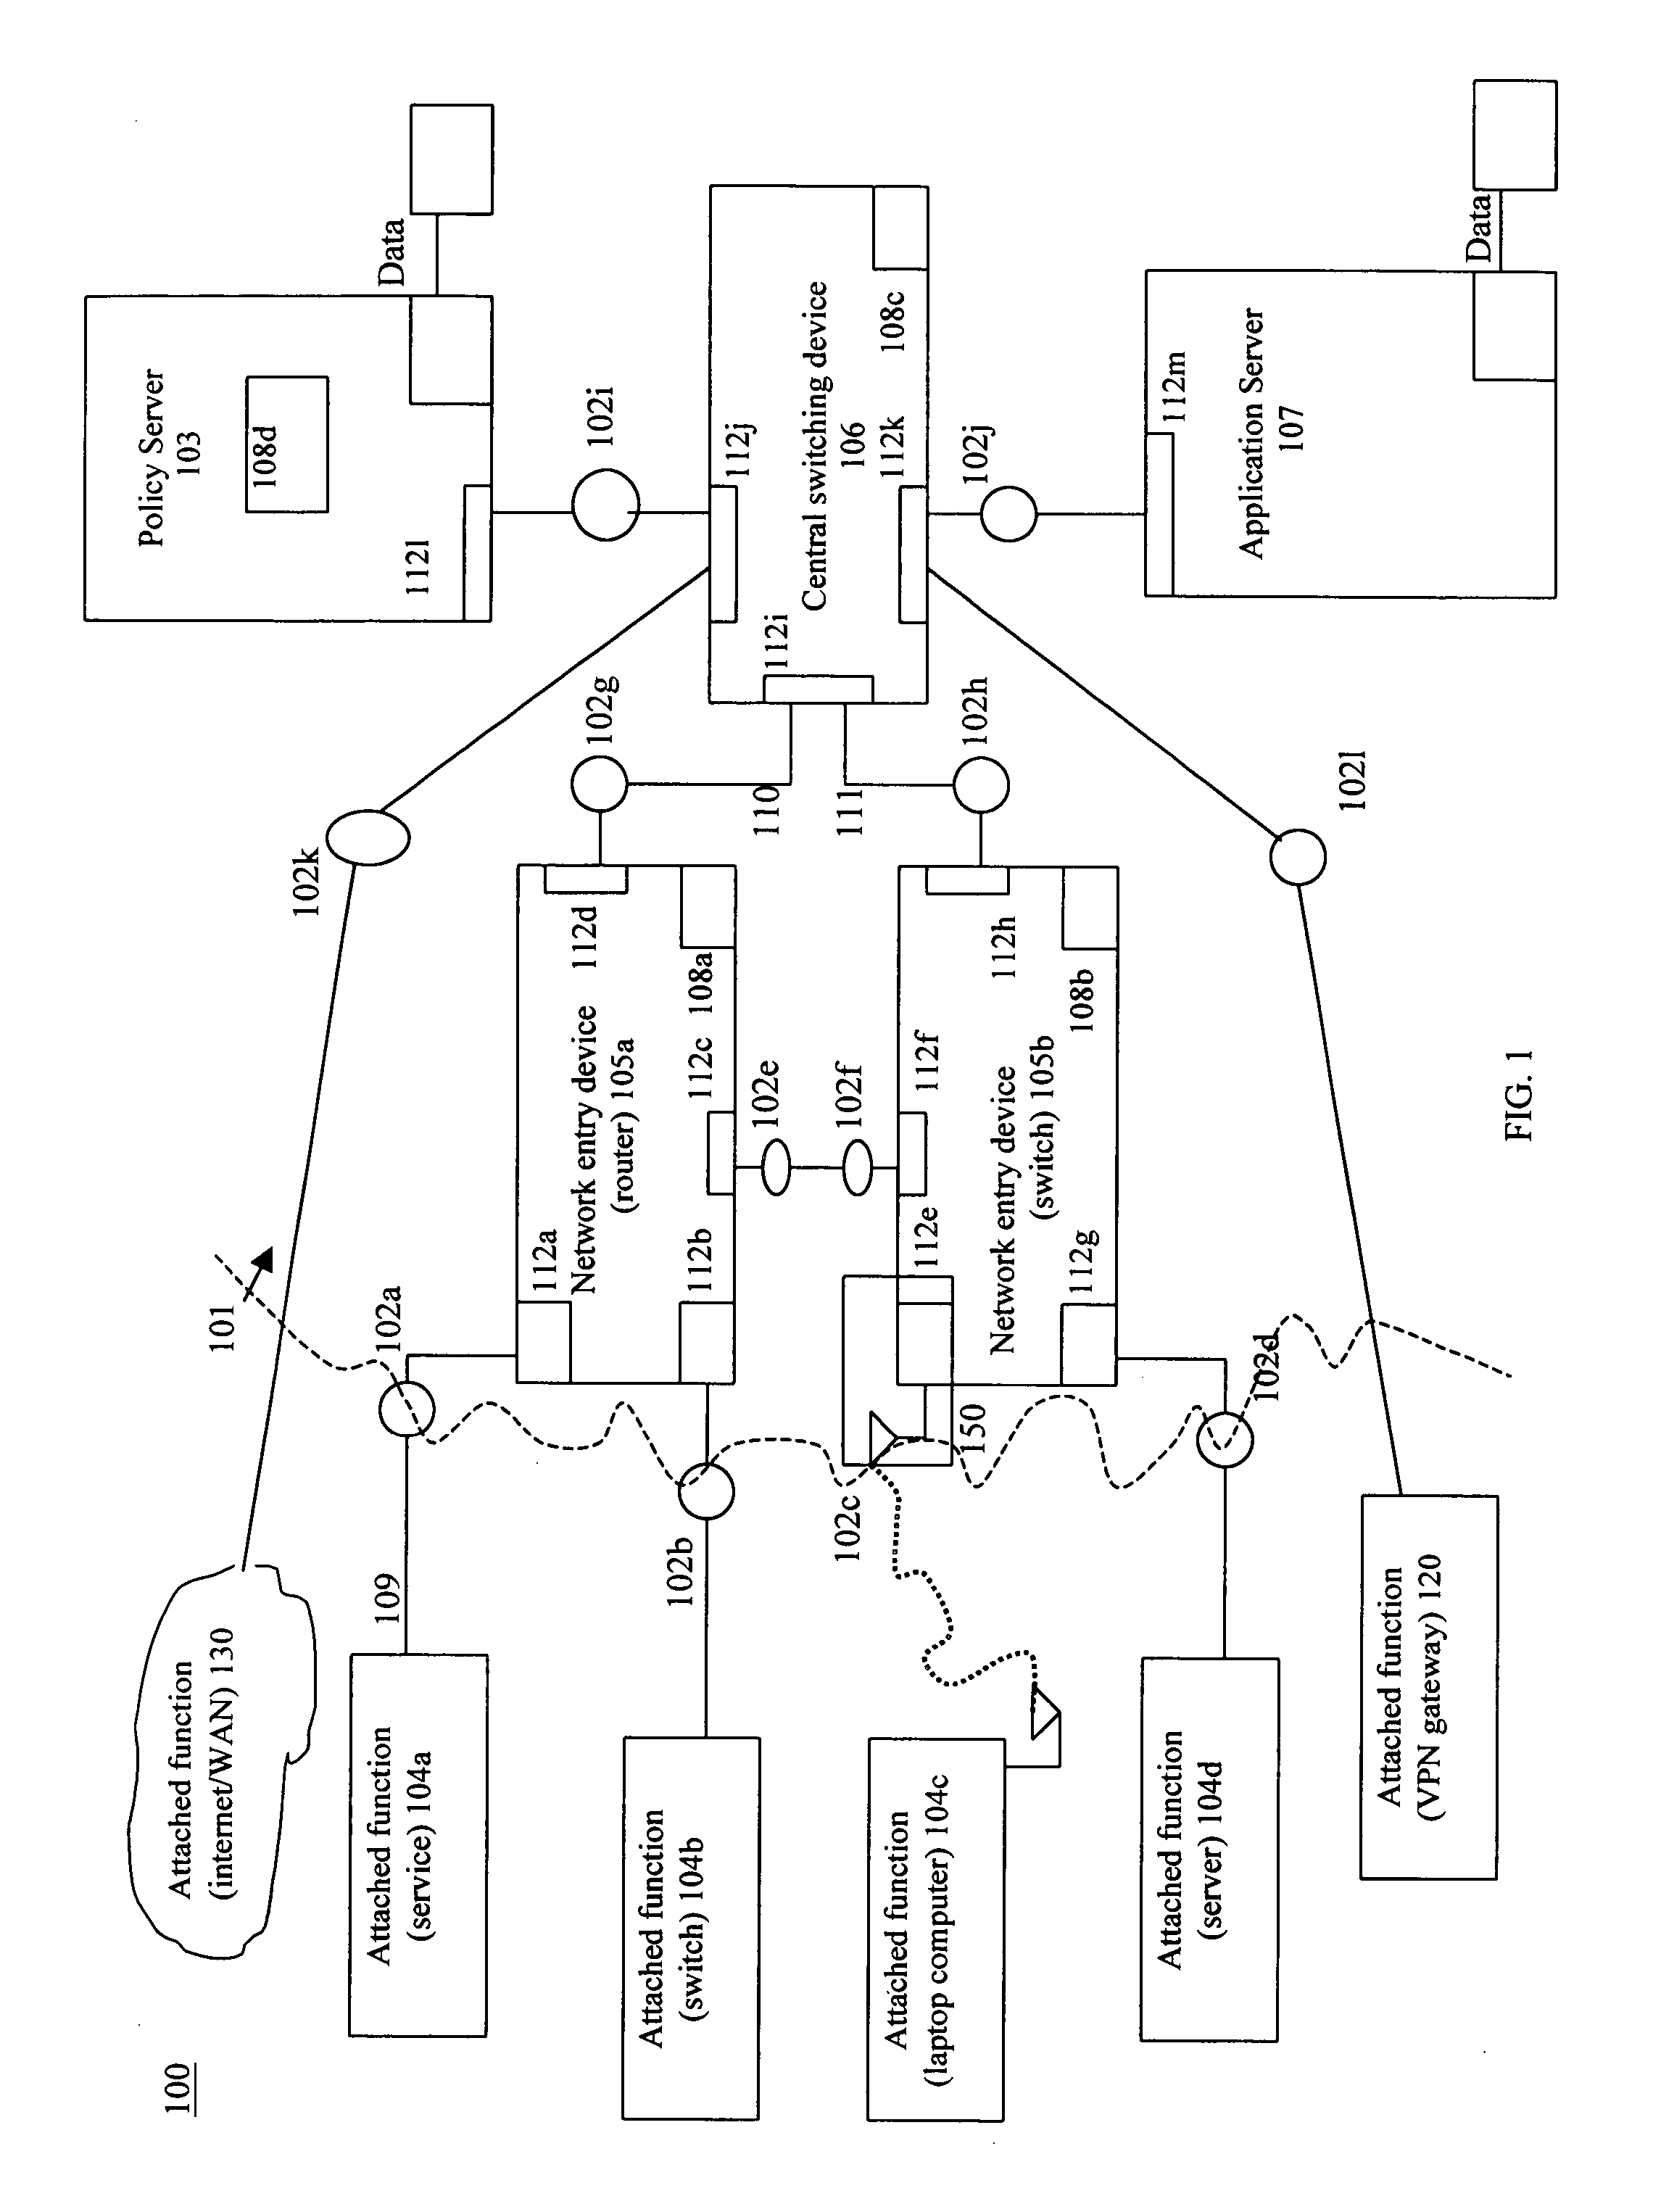 System and method for dynamic network policy management